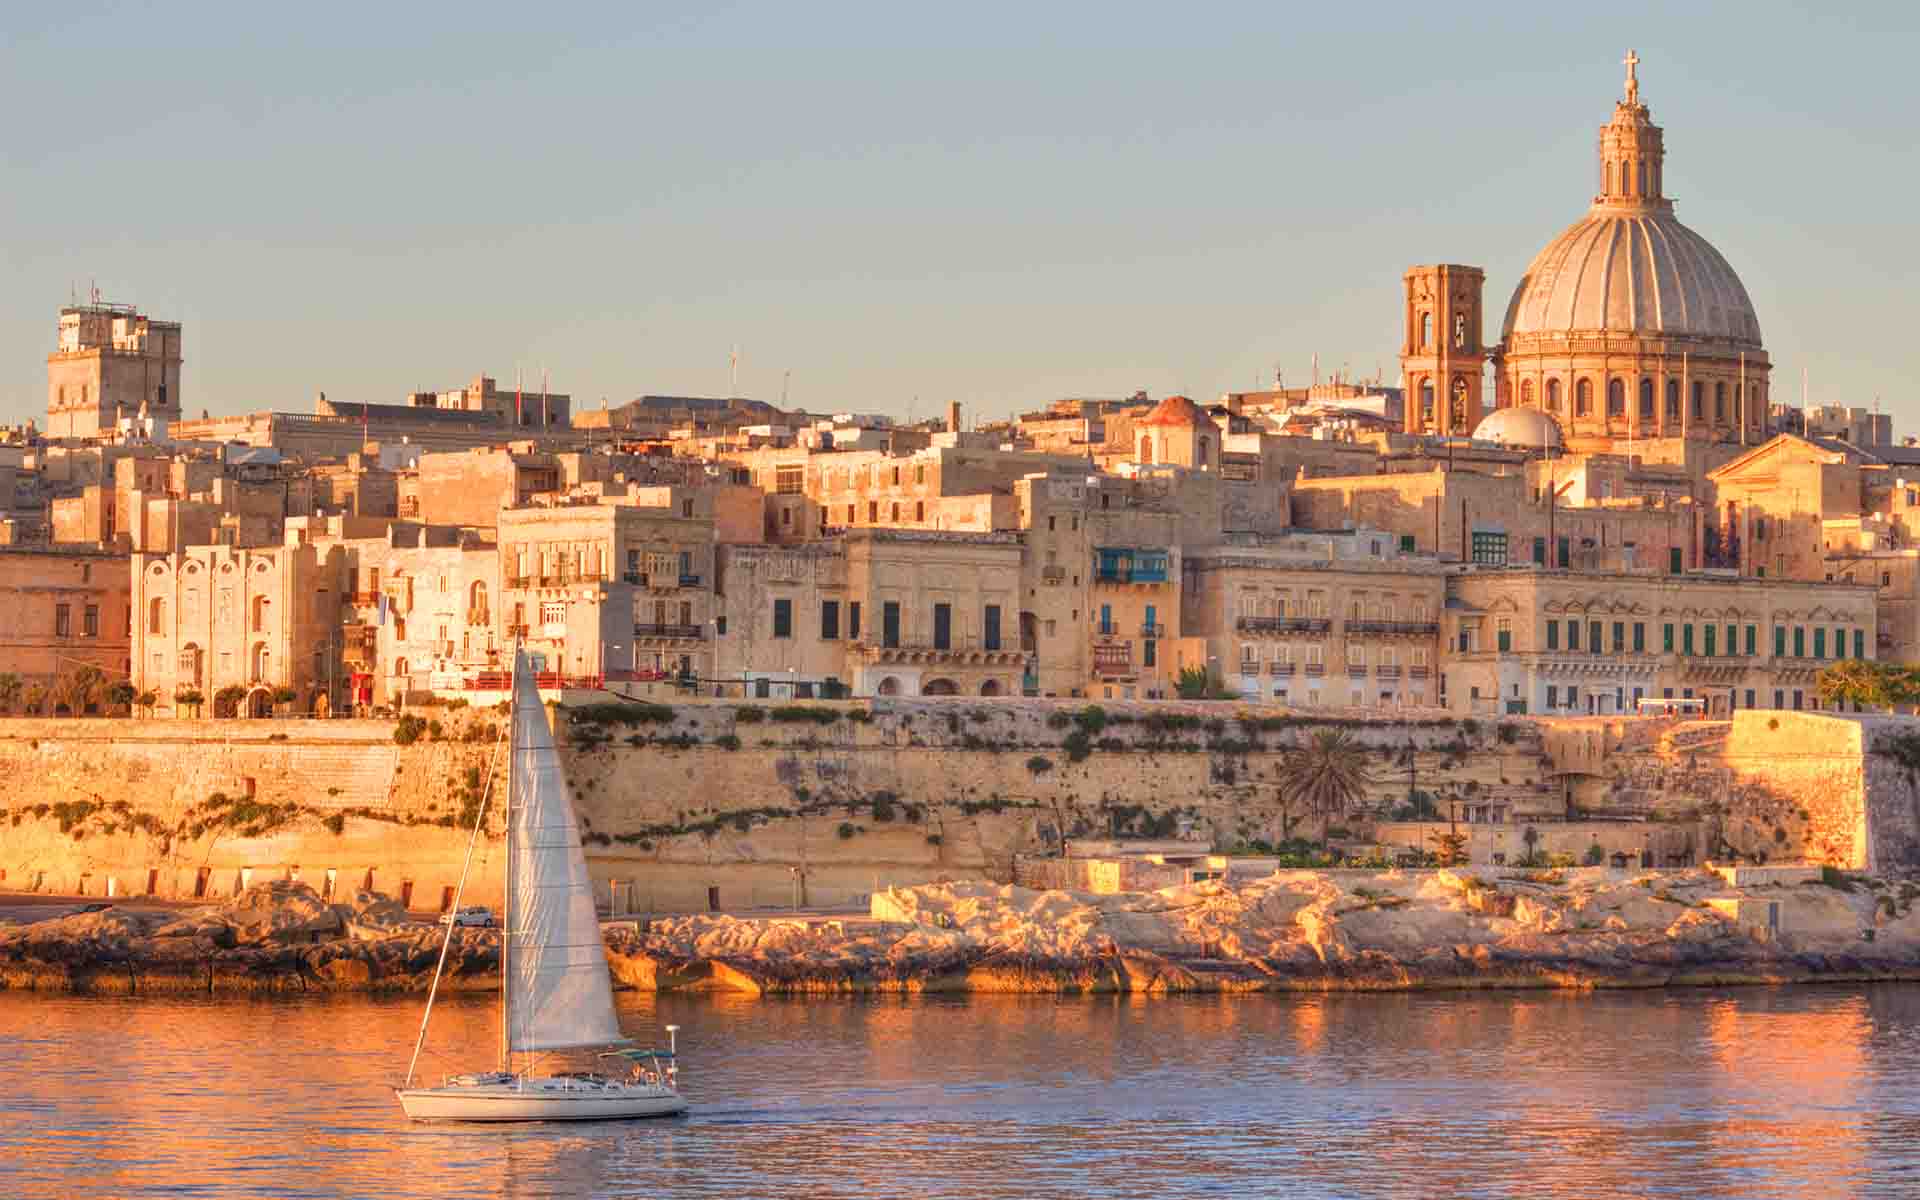 Coming for 2 Days in Malta? Here is an itinerary on how to see the most of the island in such a short span of time.